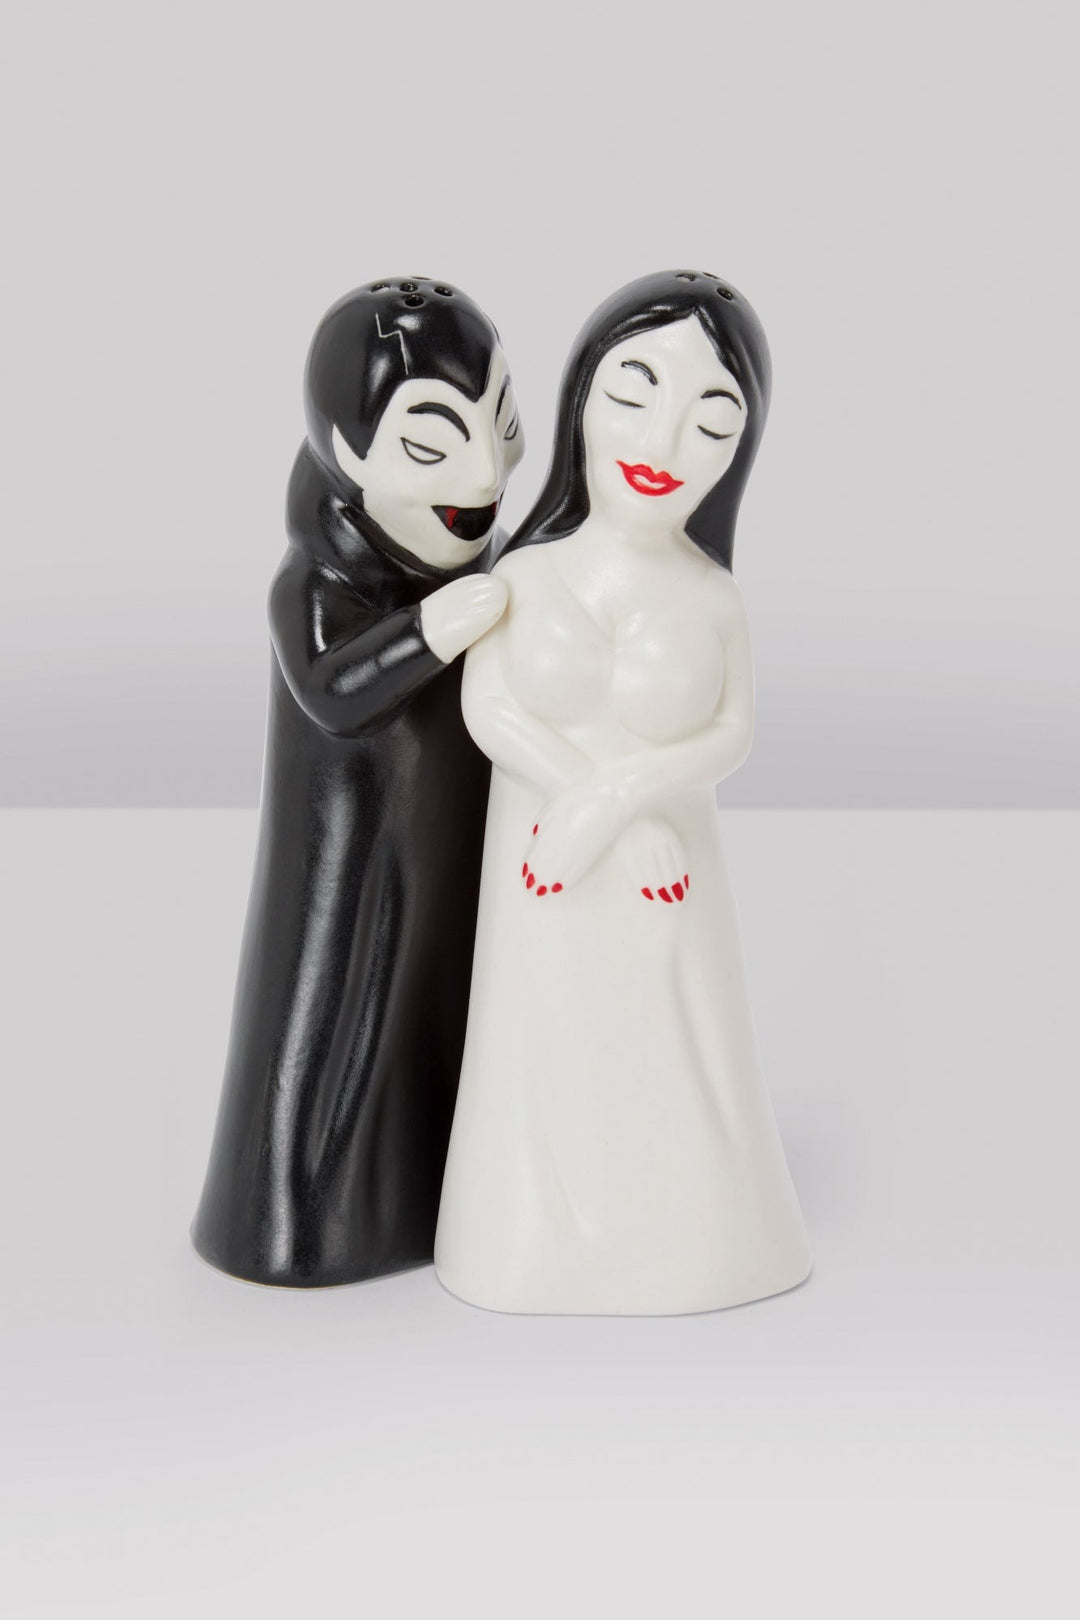 addams family alt and pepper shakers set